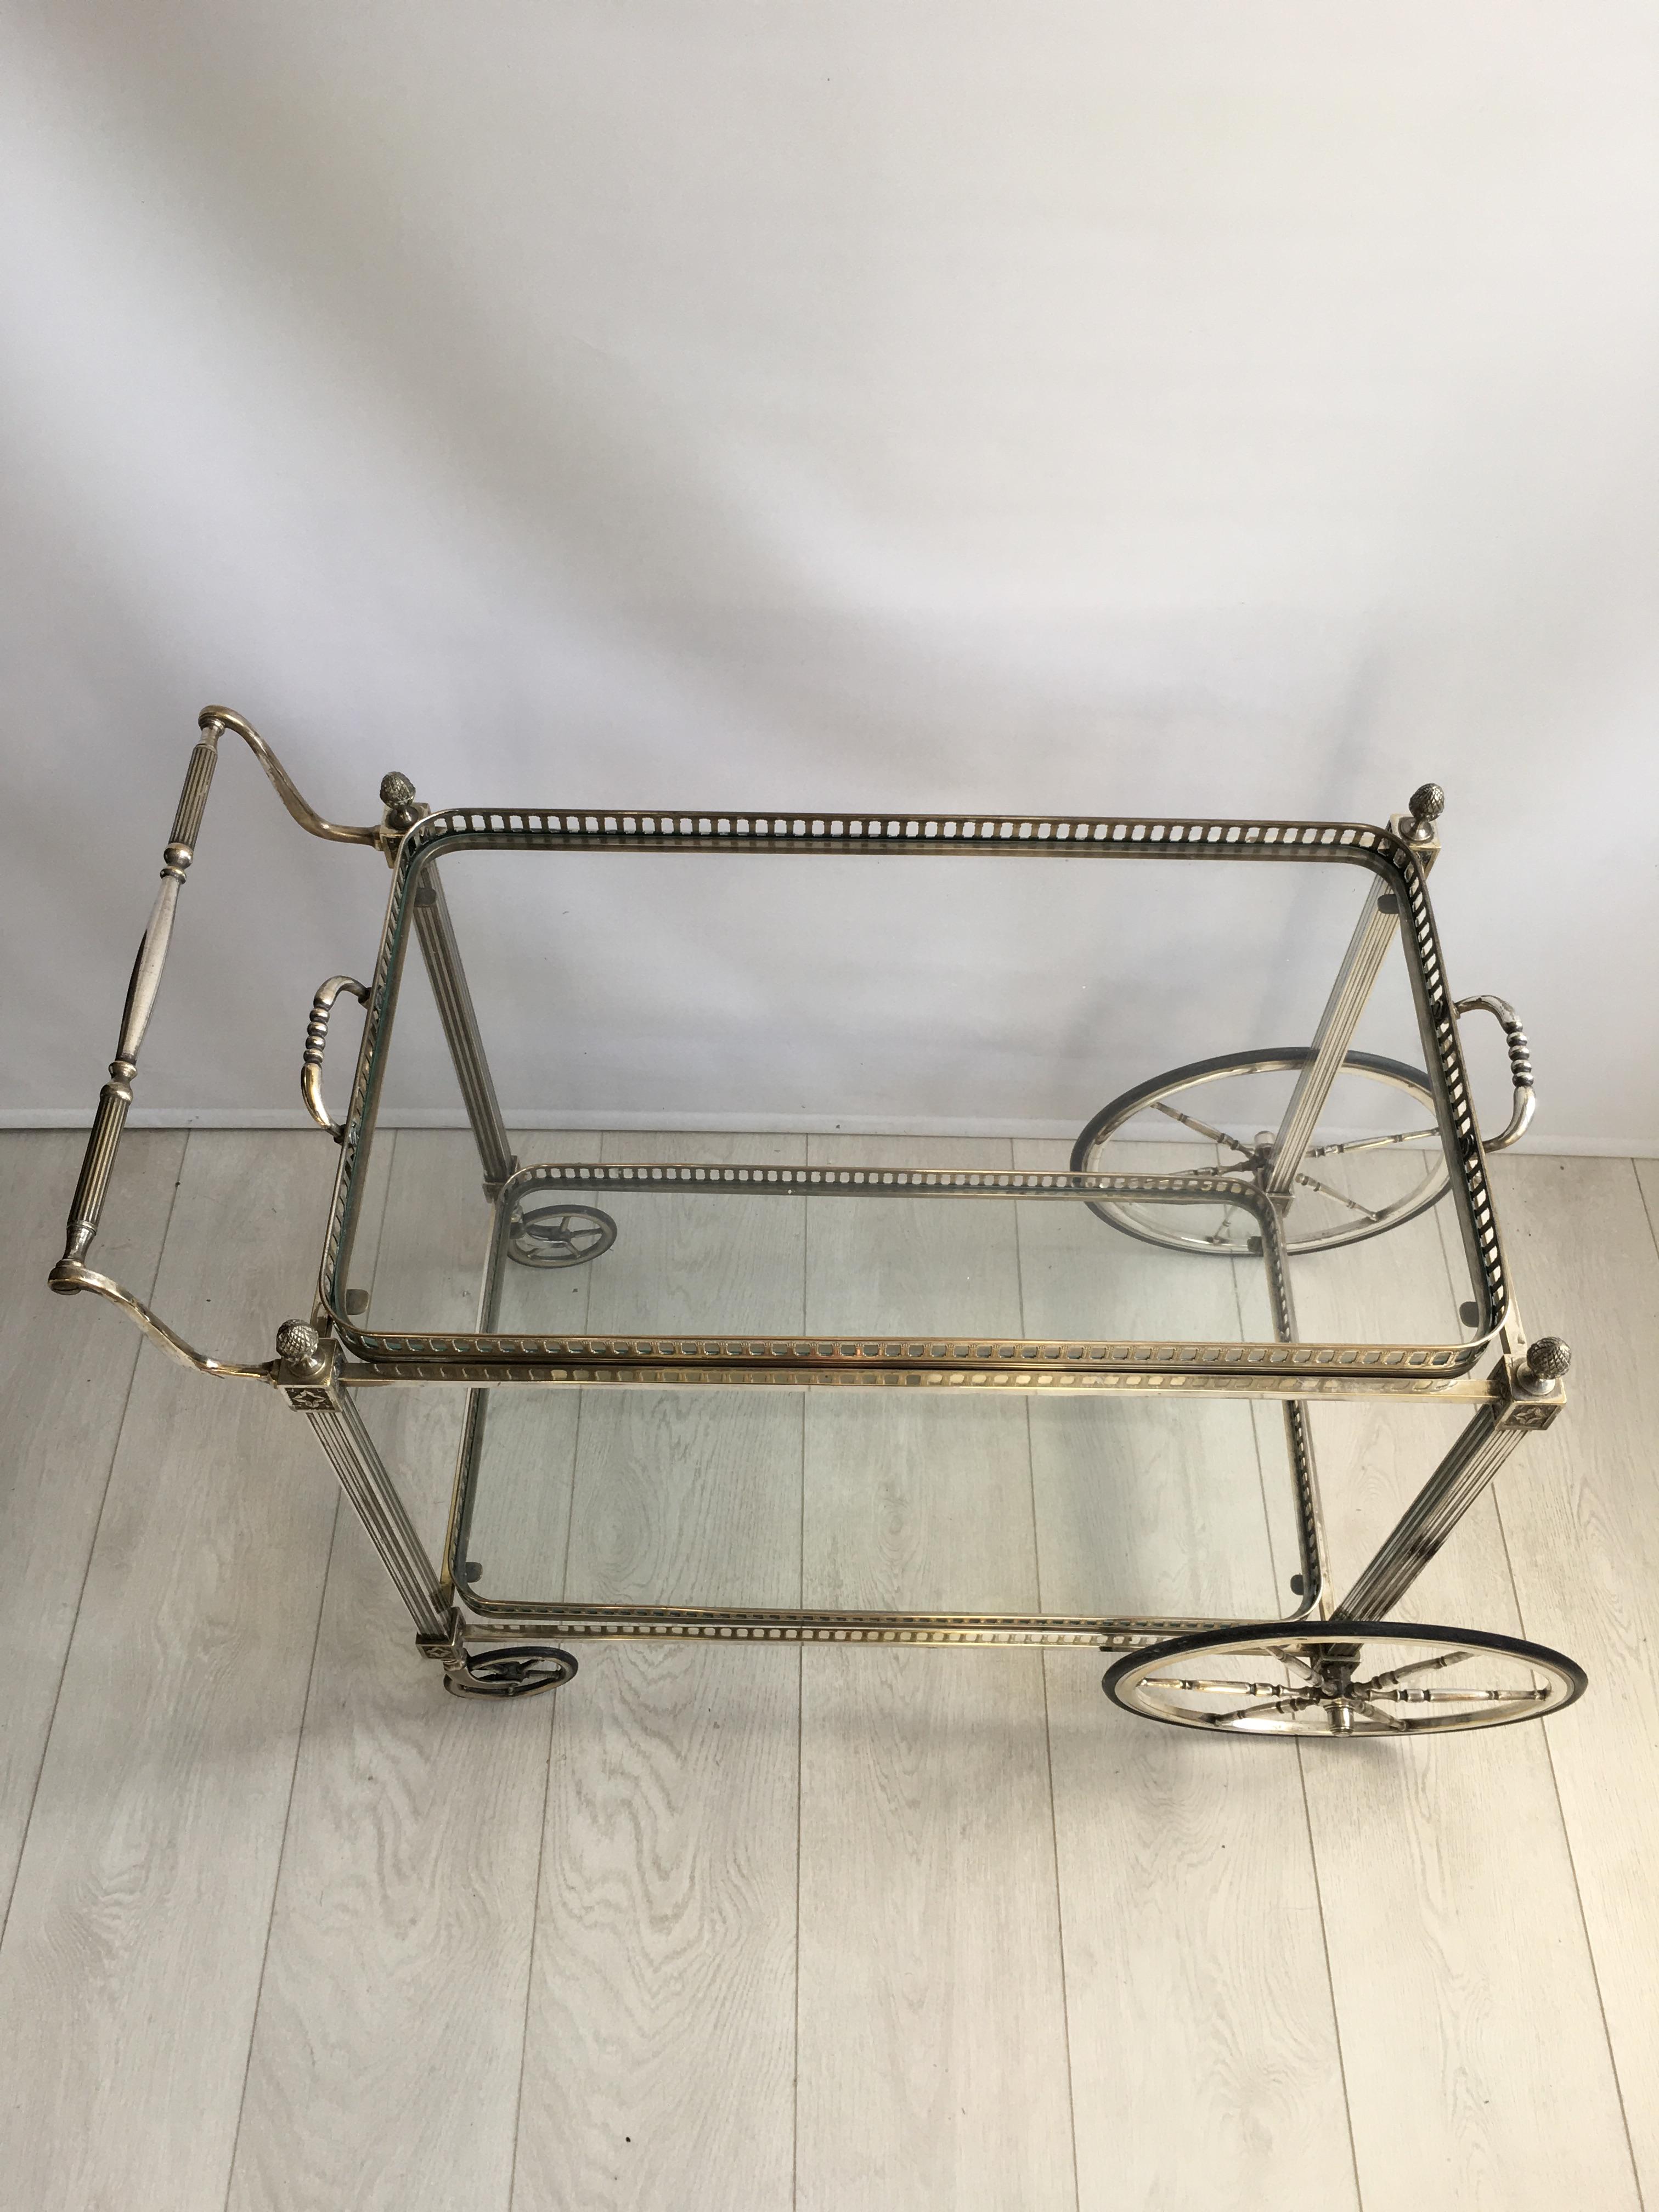 Classic Vintage French Silver Drinks Trolley or Bar Cart (Mitte des 20. Jahrhunderts)